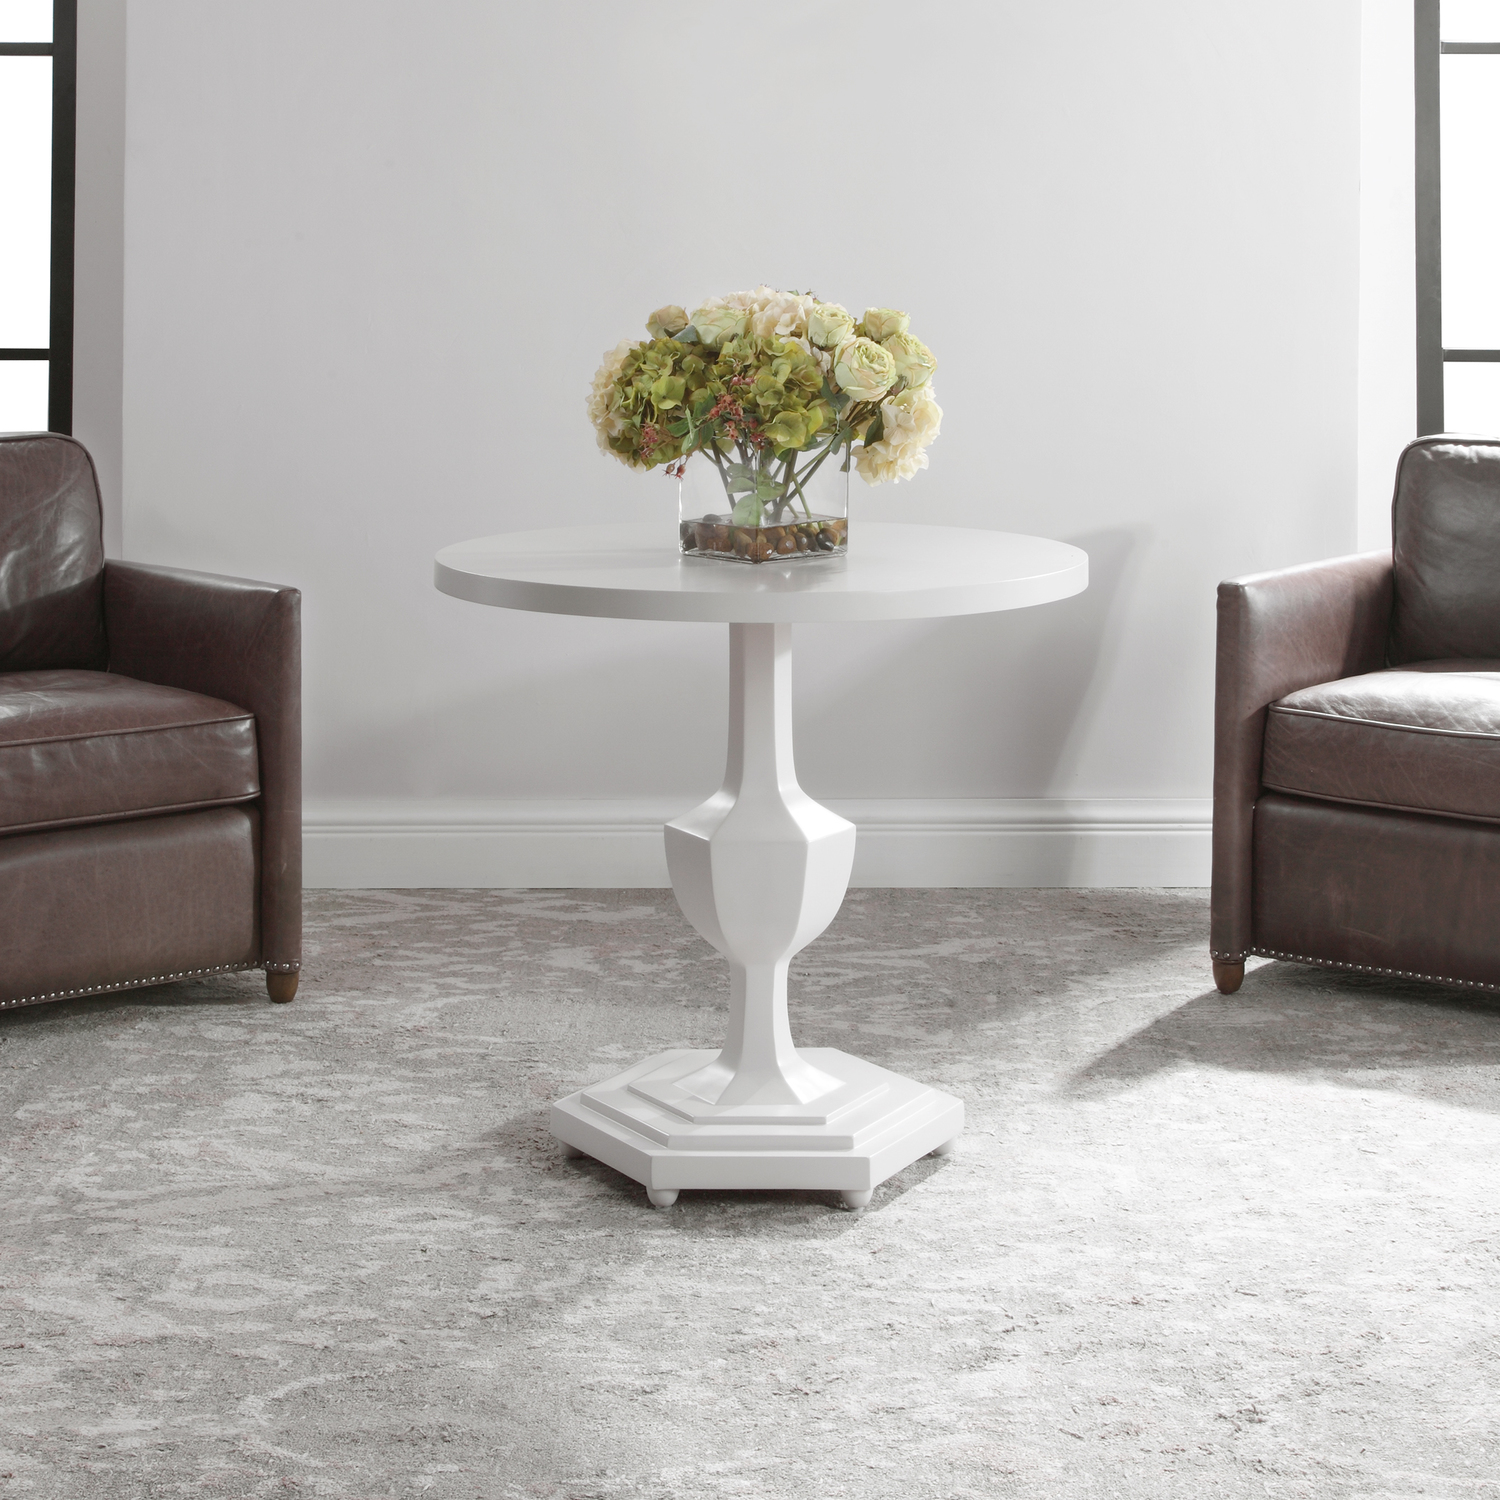 small coffee table with drawers Uttermost Accent & End Tables Showcasing A Geometric Shaped Base, This Traditionally Inspired Foyer Table Is Finished In Gloss White Giving It An Updated Modern Feel.